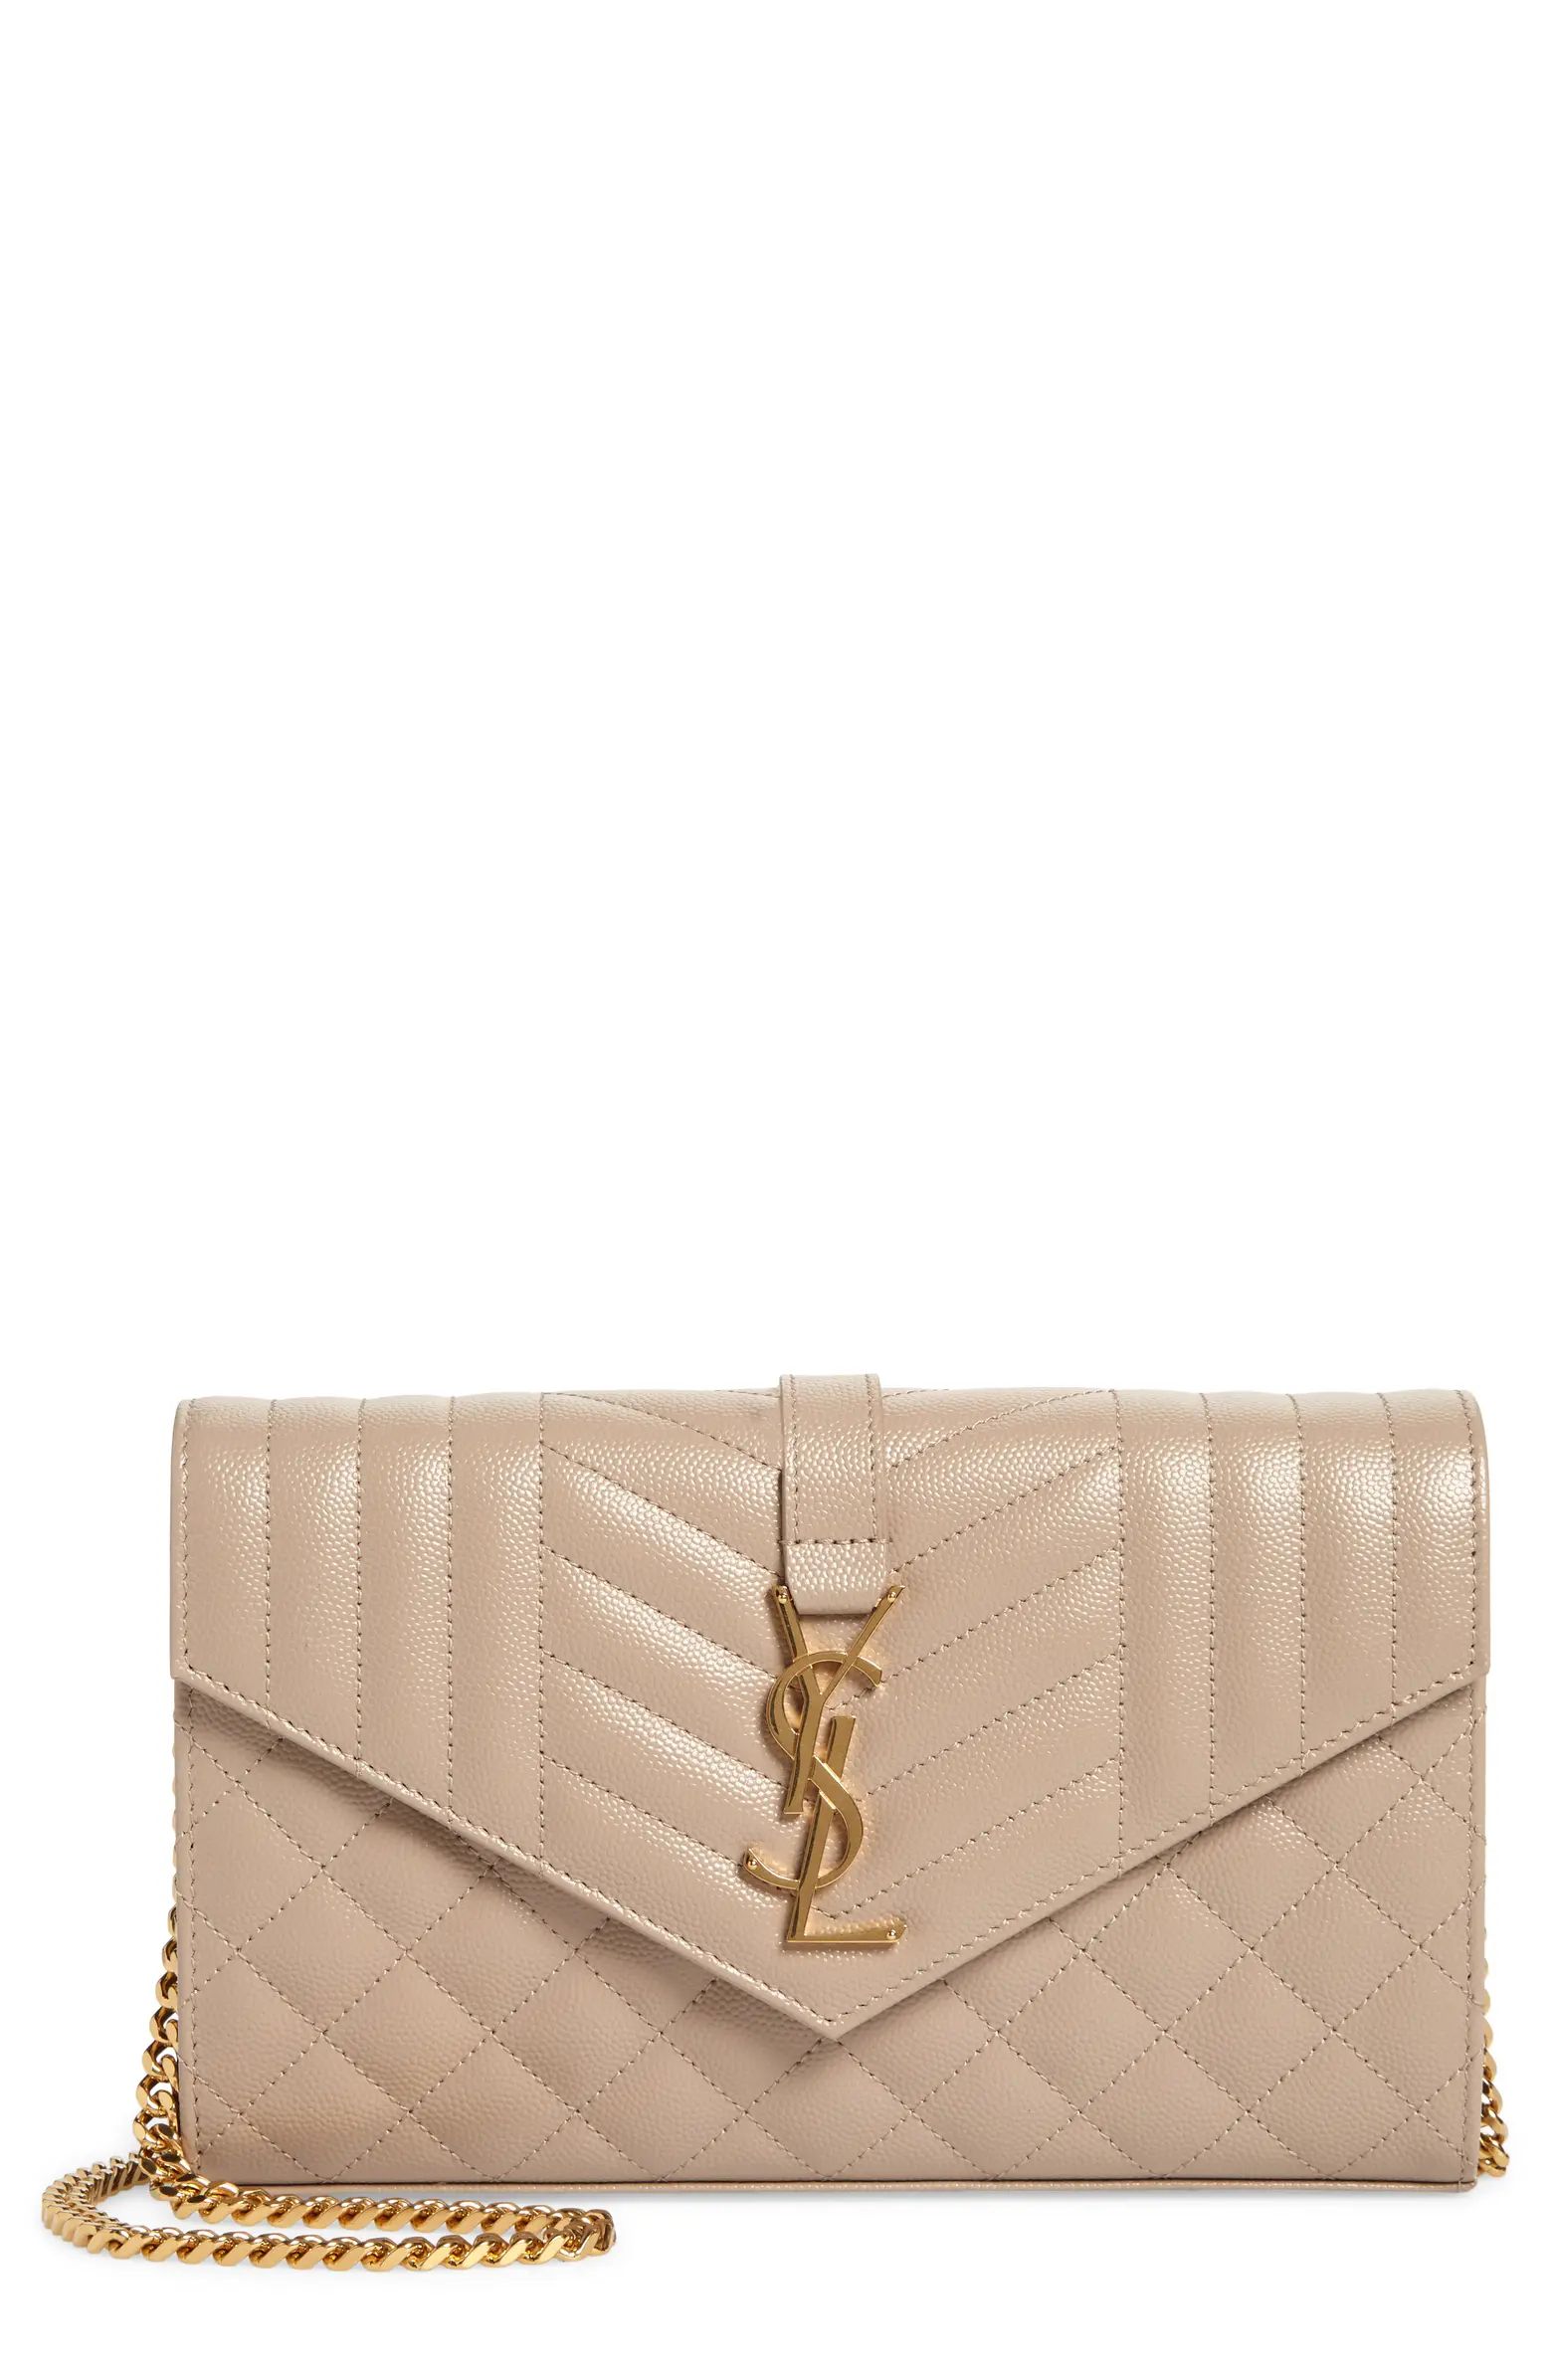 Saint Laurent Envelope Quilted Pebbled Leather Wallet on a Chain | Nordstrom | Nordstrom